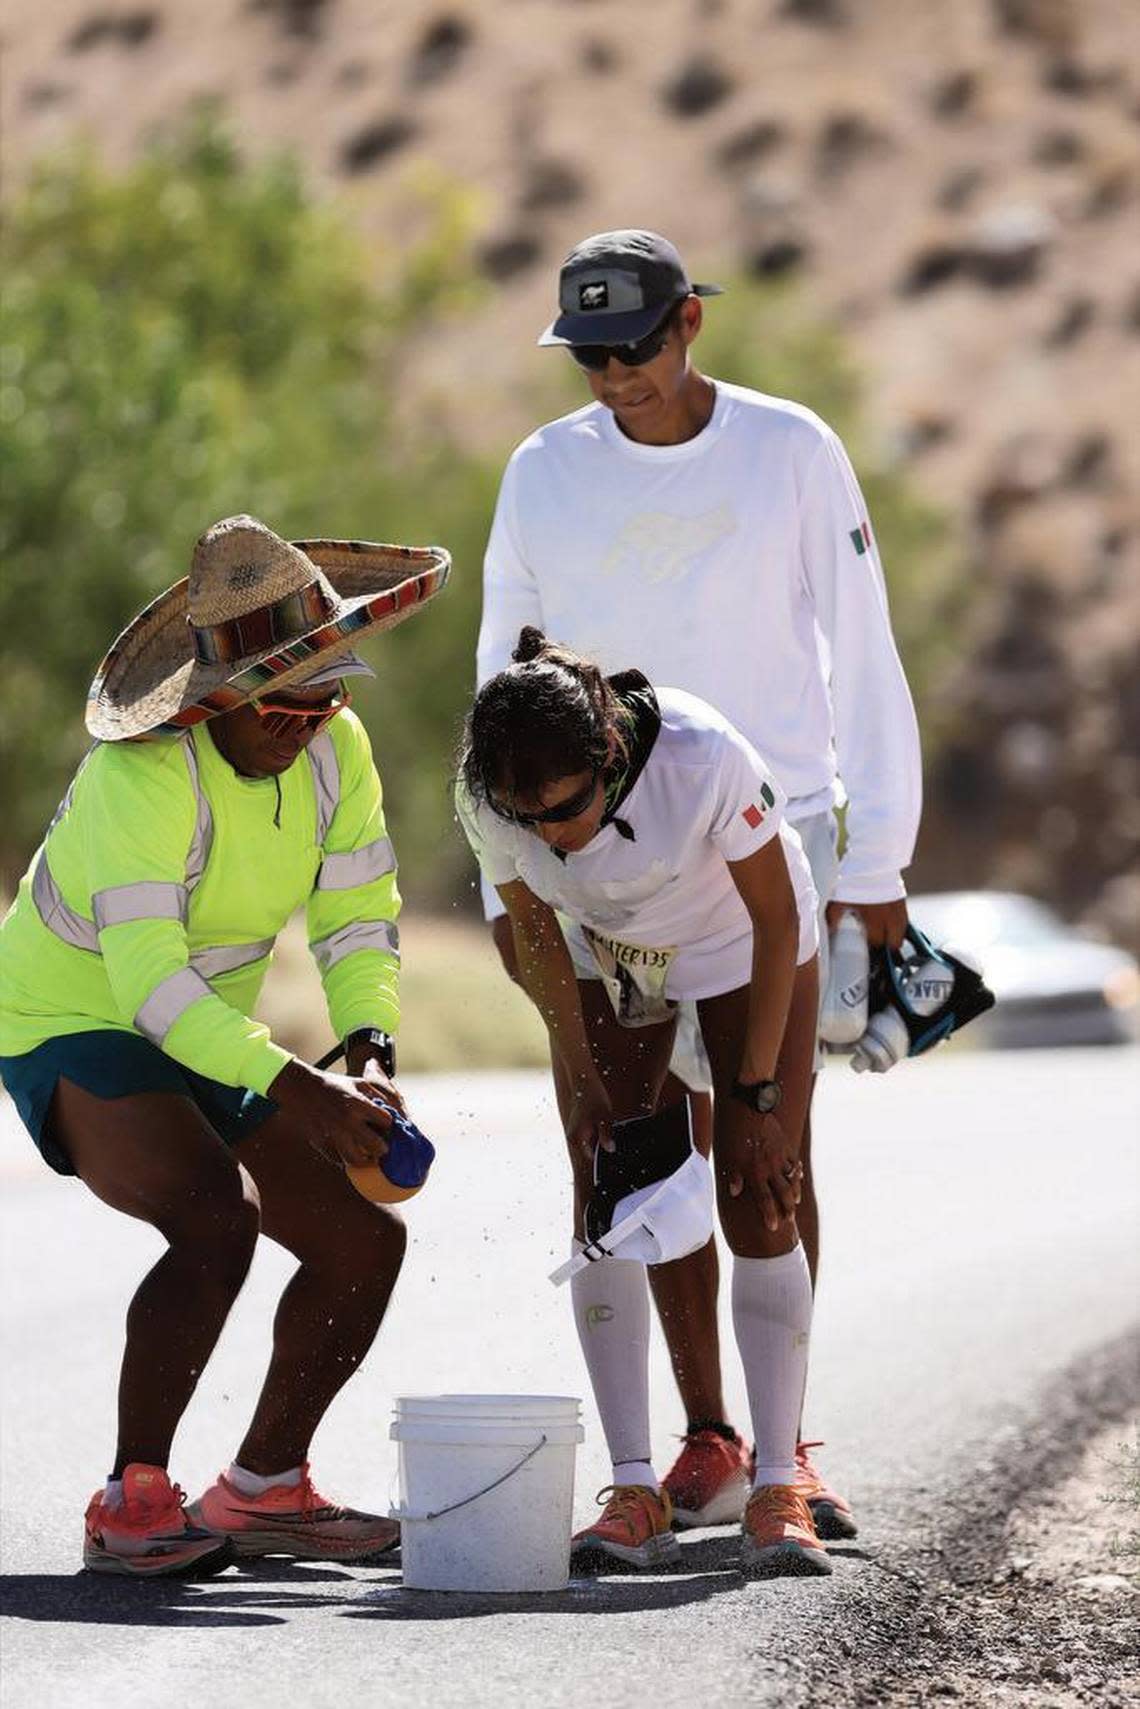 María Rivera gets some attention during the Badwater 135 race. She finished 42nd in 38:33:54.